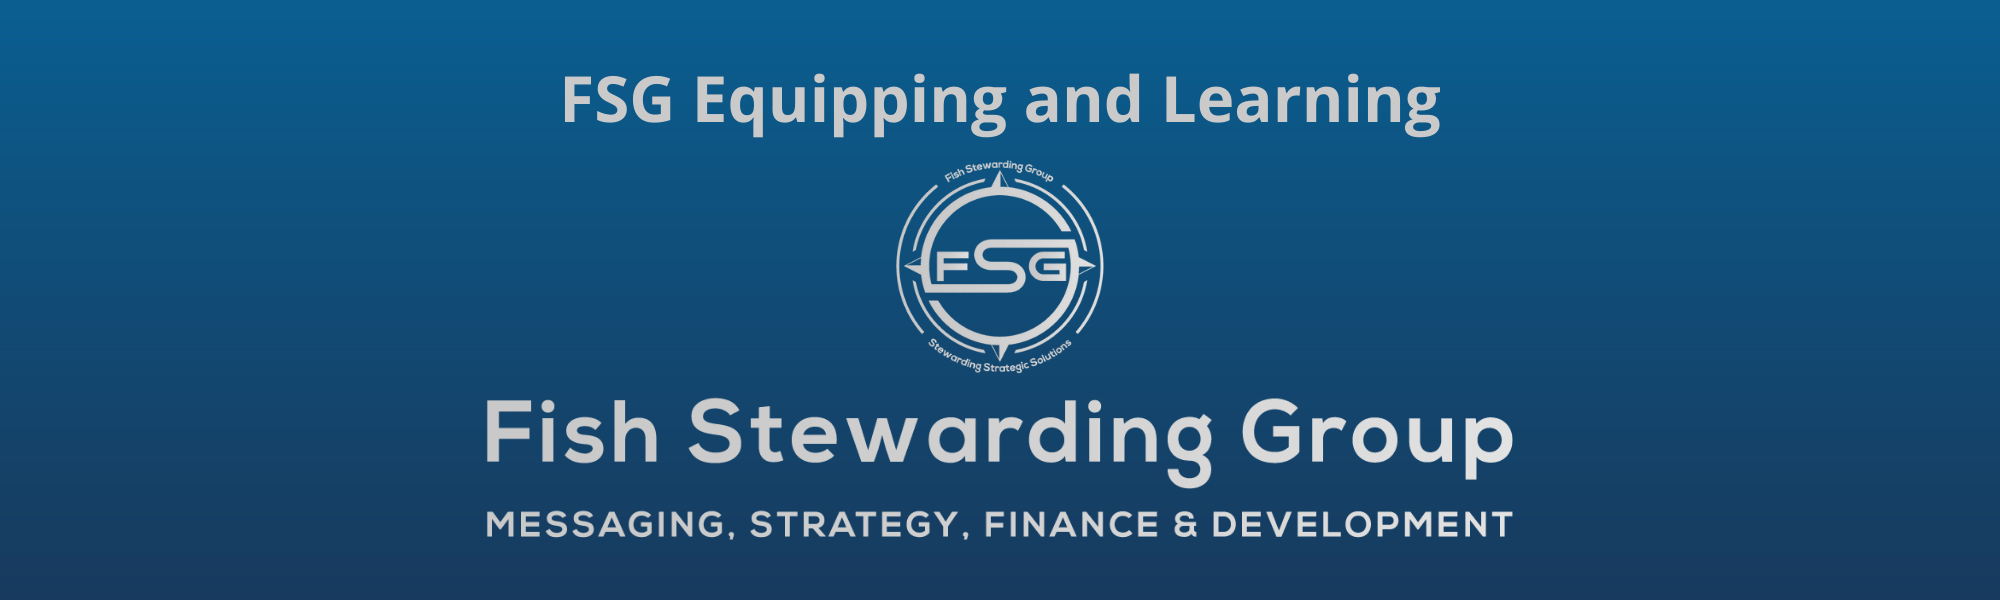 A thin rectangular Footer graphic for the FSG Equipping and Learning page. The background is a blue gradient color that goes from a dark blue on the bottom to a lighter blue on top. The text in gray on top reads FSG Equipping and Learning. The text in gray on the bottom center reads: Fish Stewarding Group and beneath that, the text reads Messaging, Strategy, Finance and Development. In the center above the text is the FSG logo in gray. The logo has the letters FSG in the middle with a circle with four pointed arrows facing north, south, east and west with the S connected to that circle. Four rounded lines make the next circle of the circle and the last layer is a thin circle with the text on the Bottom that reads Stewarding Strategist Solutions and on top, the text reads Fish Stewarding Group.